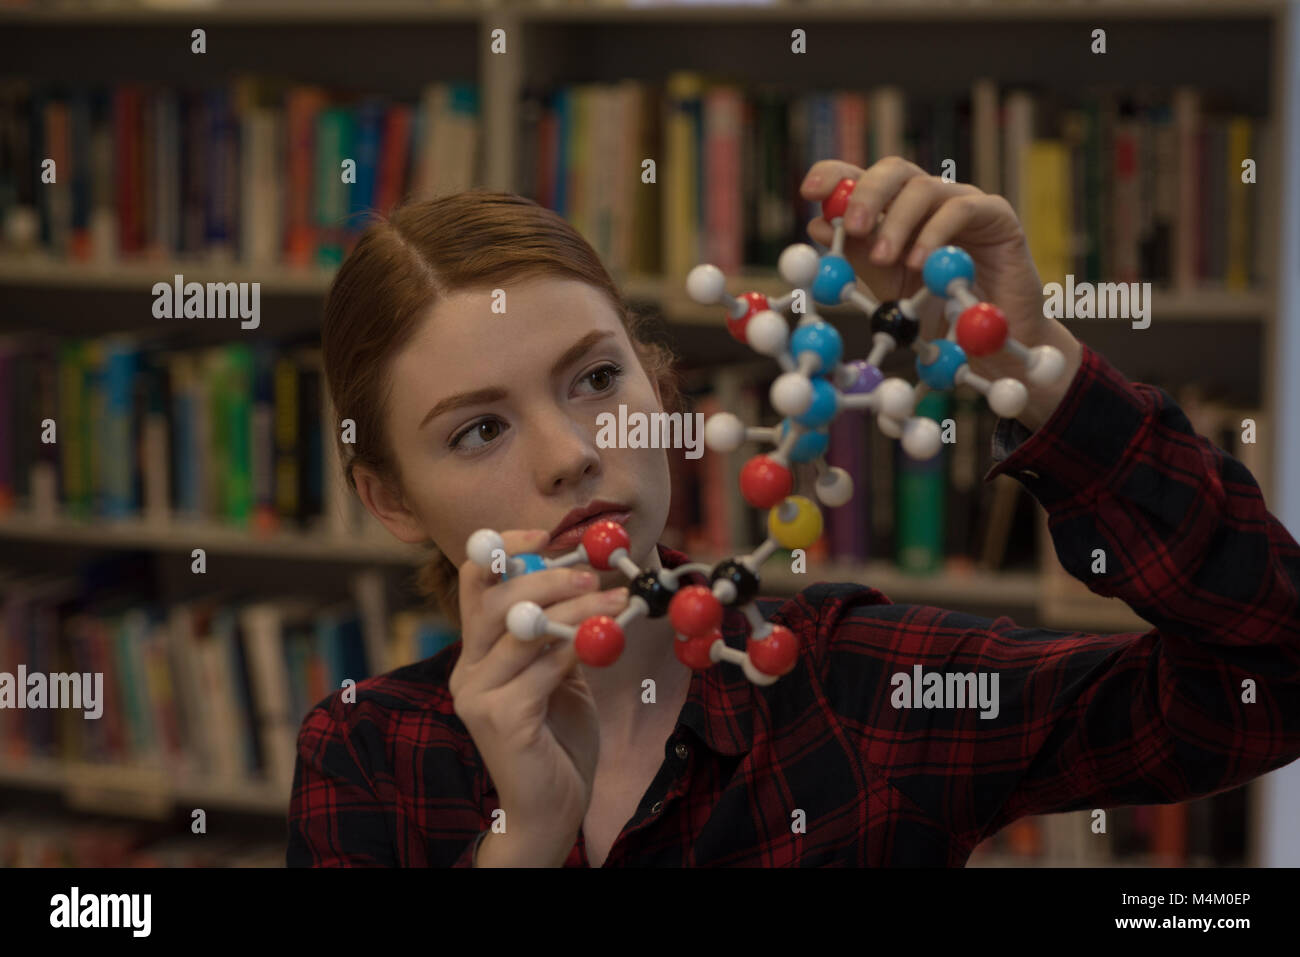 Young woman analyzing a molecule model Stock Photo